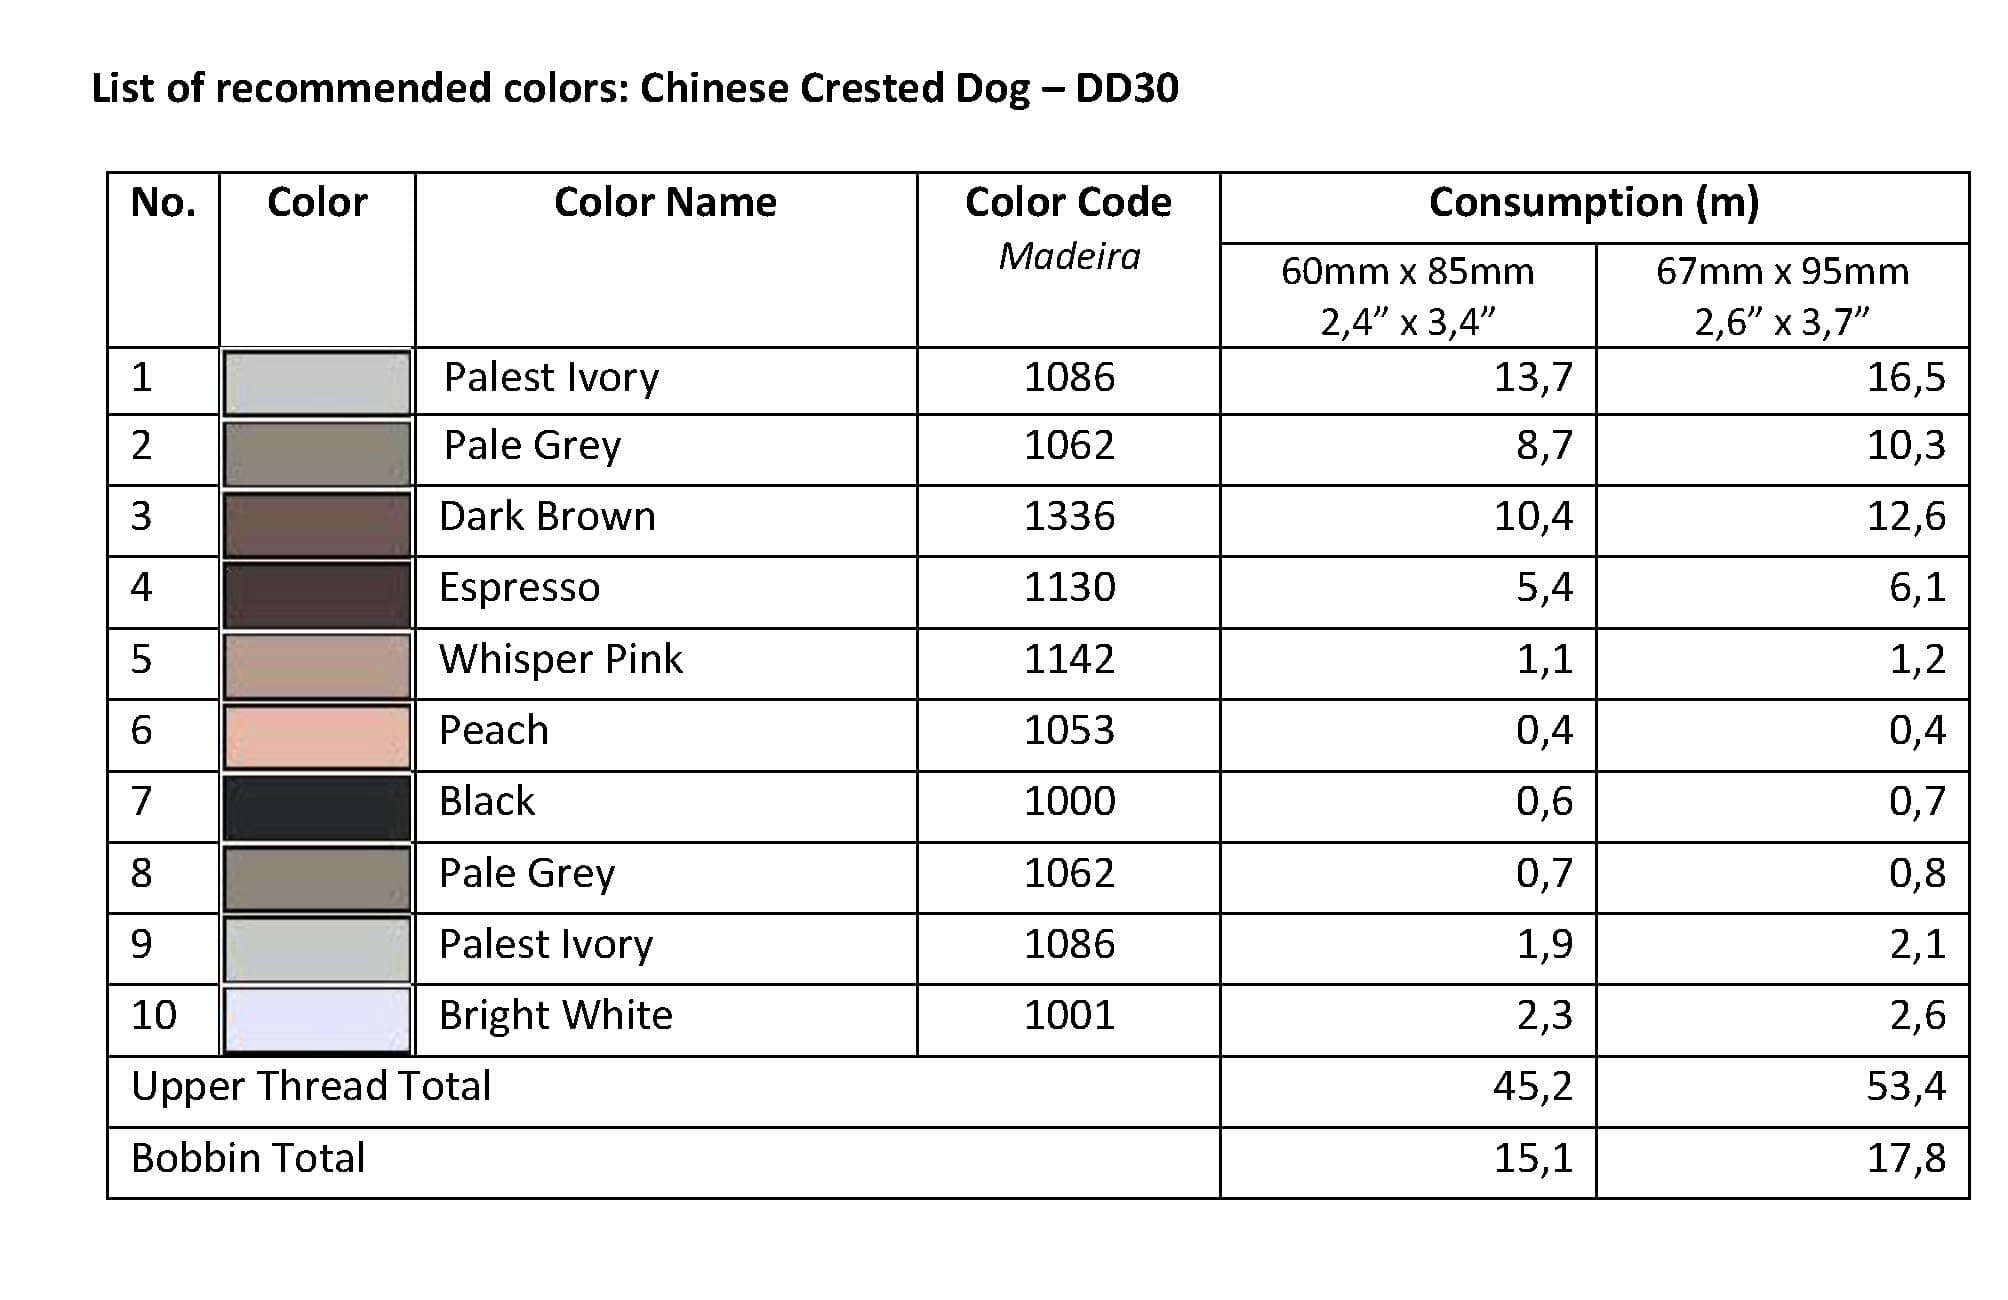 List of Recommended Colors - Chinese Crested Dog DD30